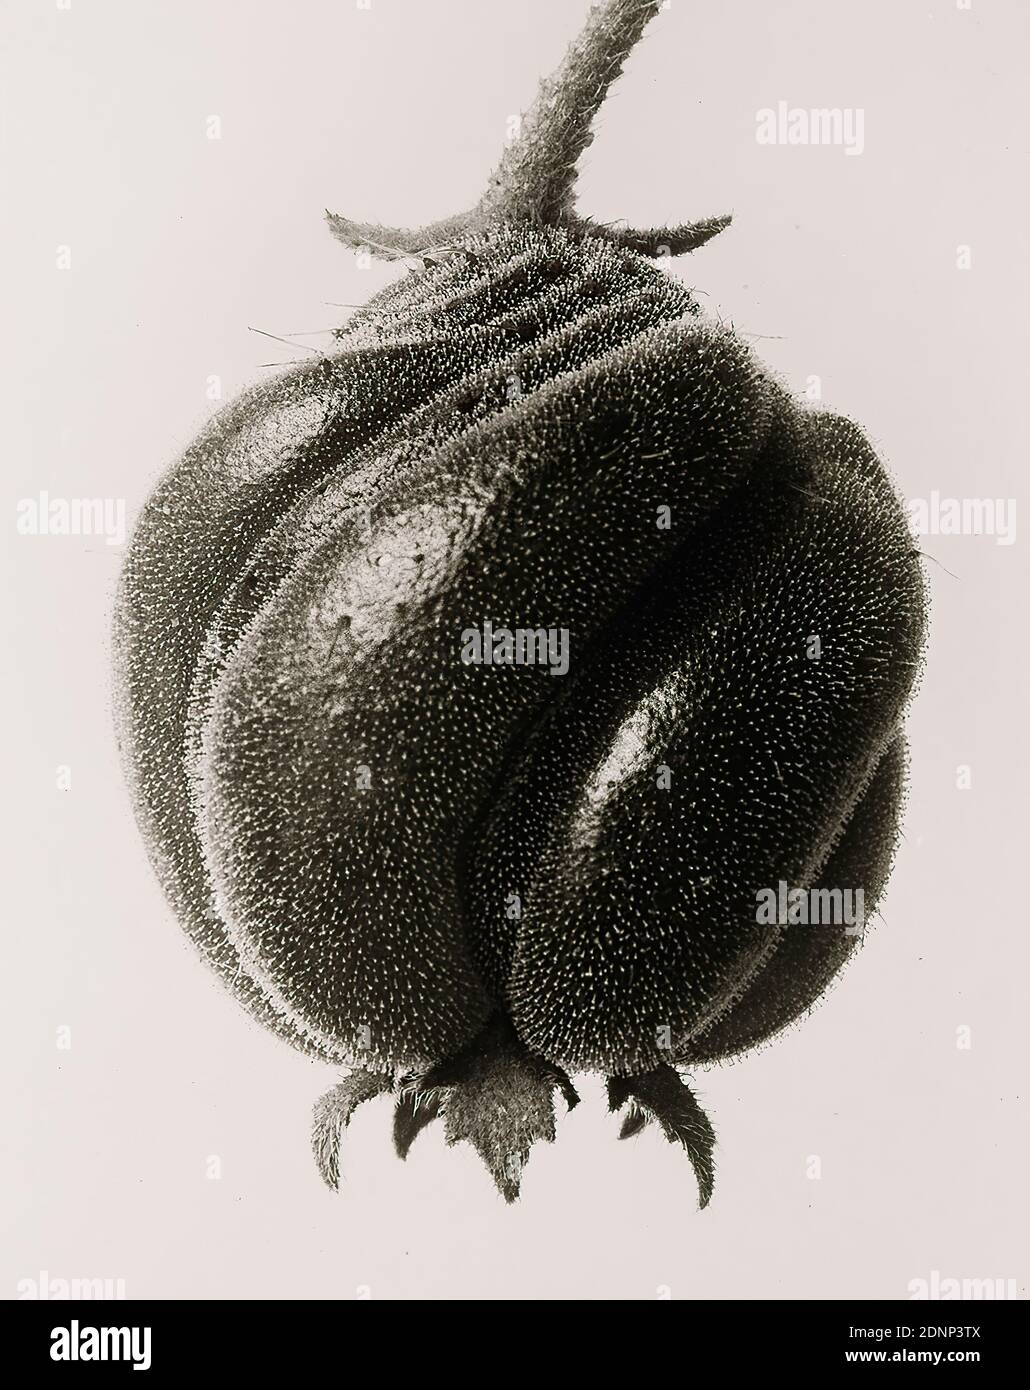 Karl Blossfeldt, Blumenbachia Hieronymi - Closed seed capsule magnified 18 times, silver gelatin paper, black and white positive process, image size: height: 25.9 cm; width: 20.9 cm, stamp: verso on cardboard: Galerie Wilde Köln, inscribed: in black: Karl Blossfeldt, 12-4/50-75, nature photography, plants and herbs, botany Stock Photo